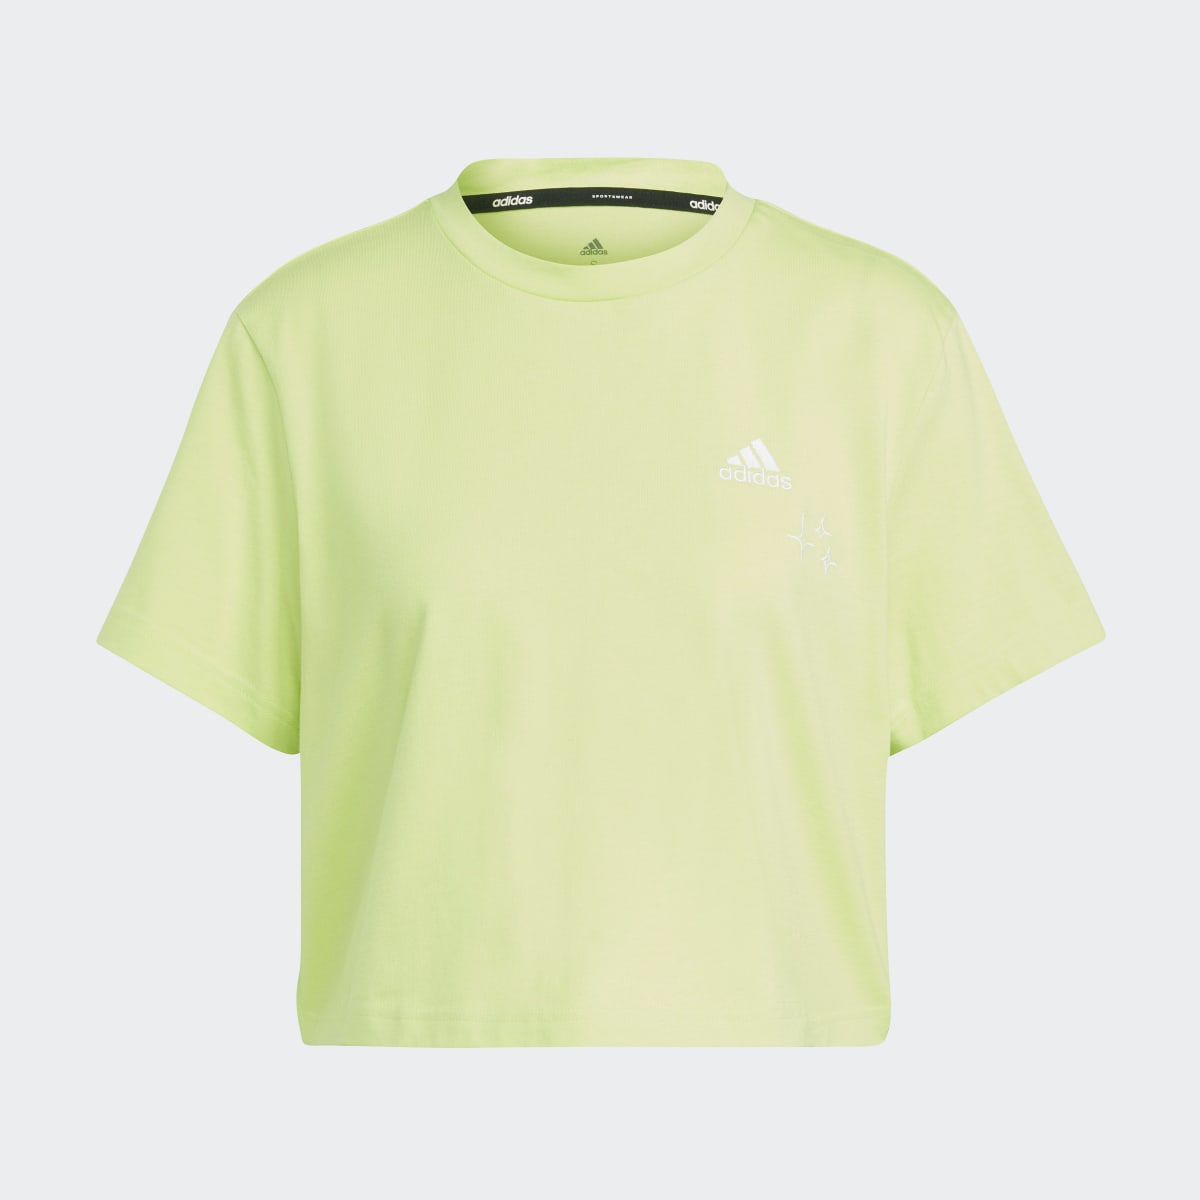 Adidas Scribble Embroidery Crop T-Shirt. 5